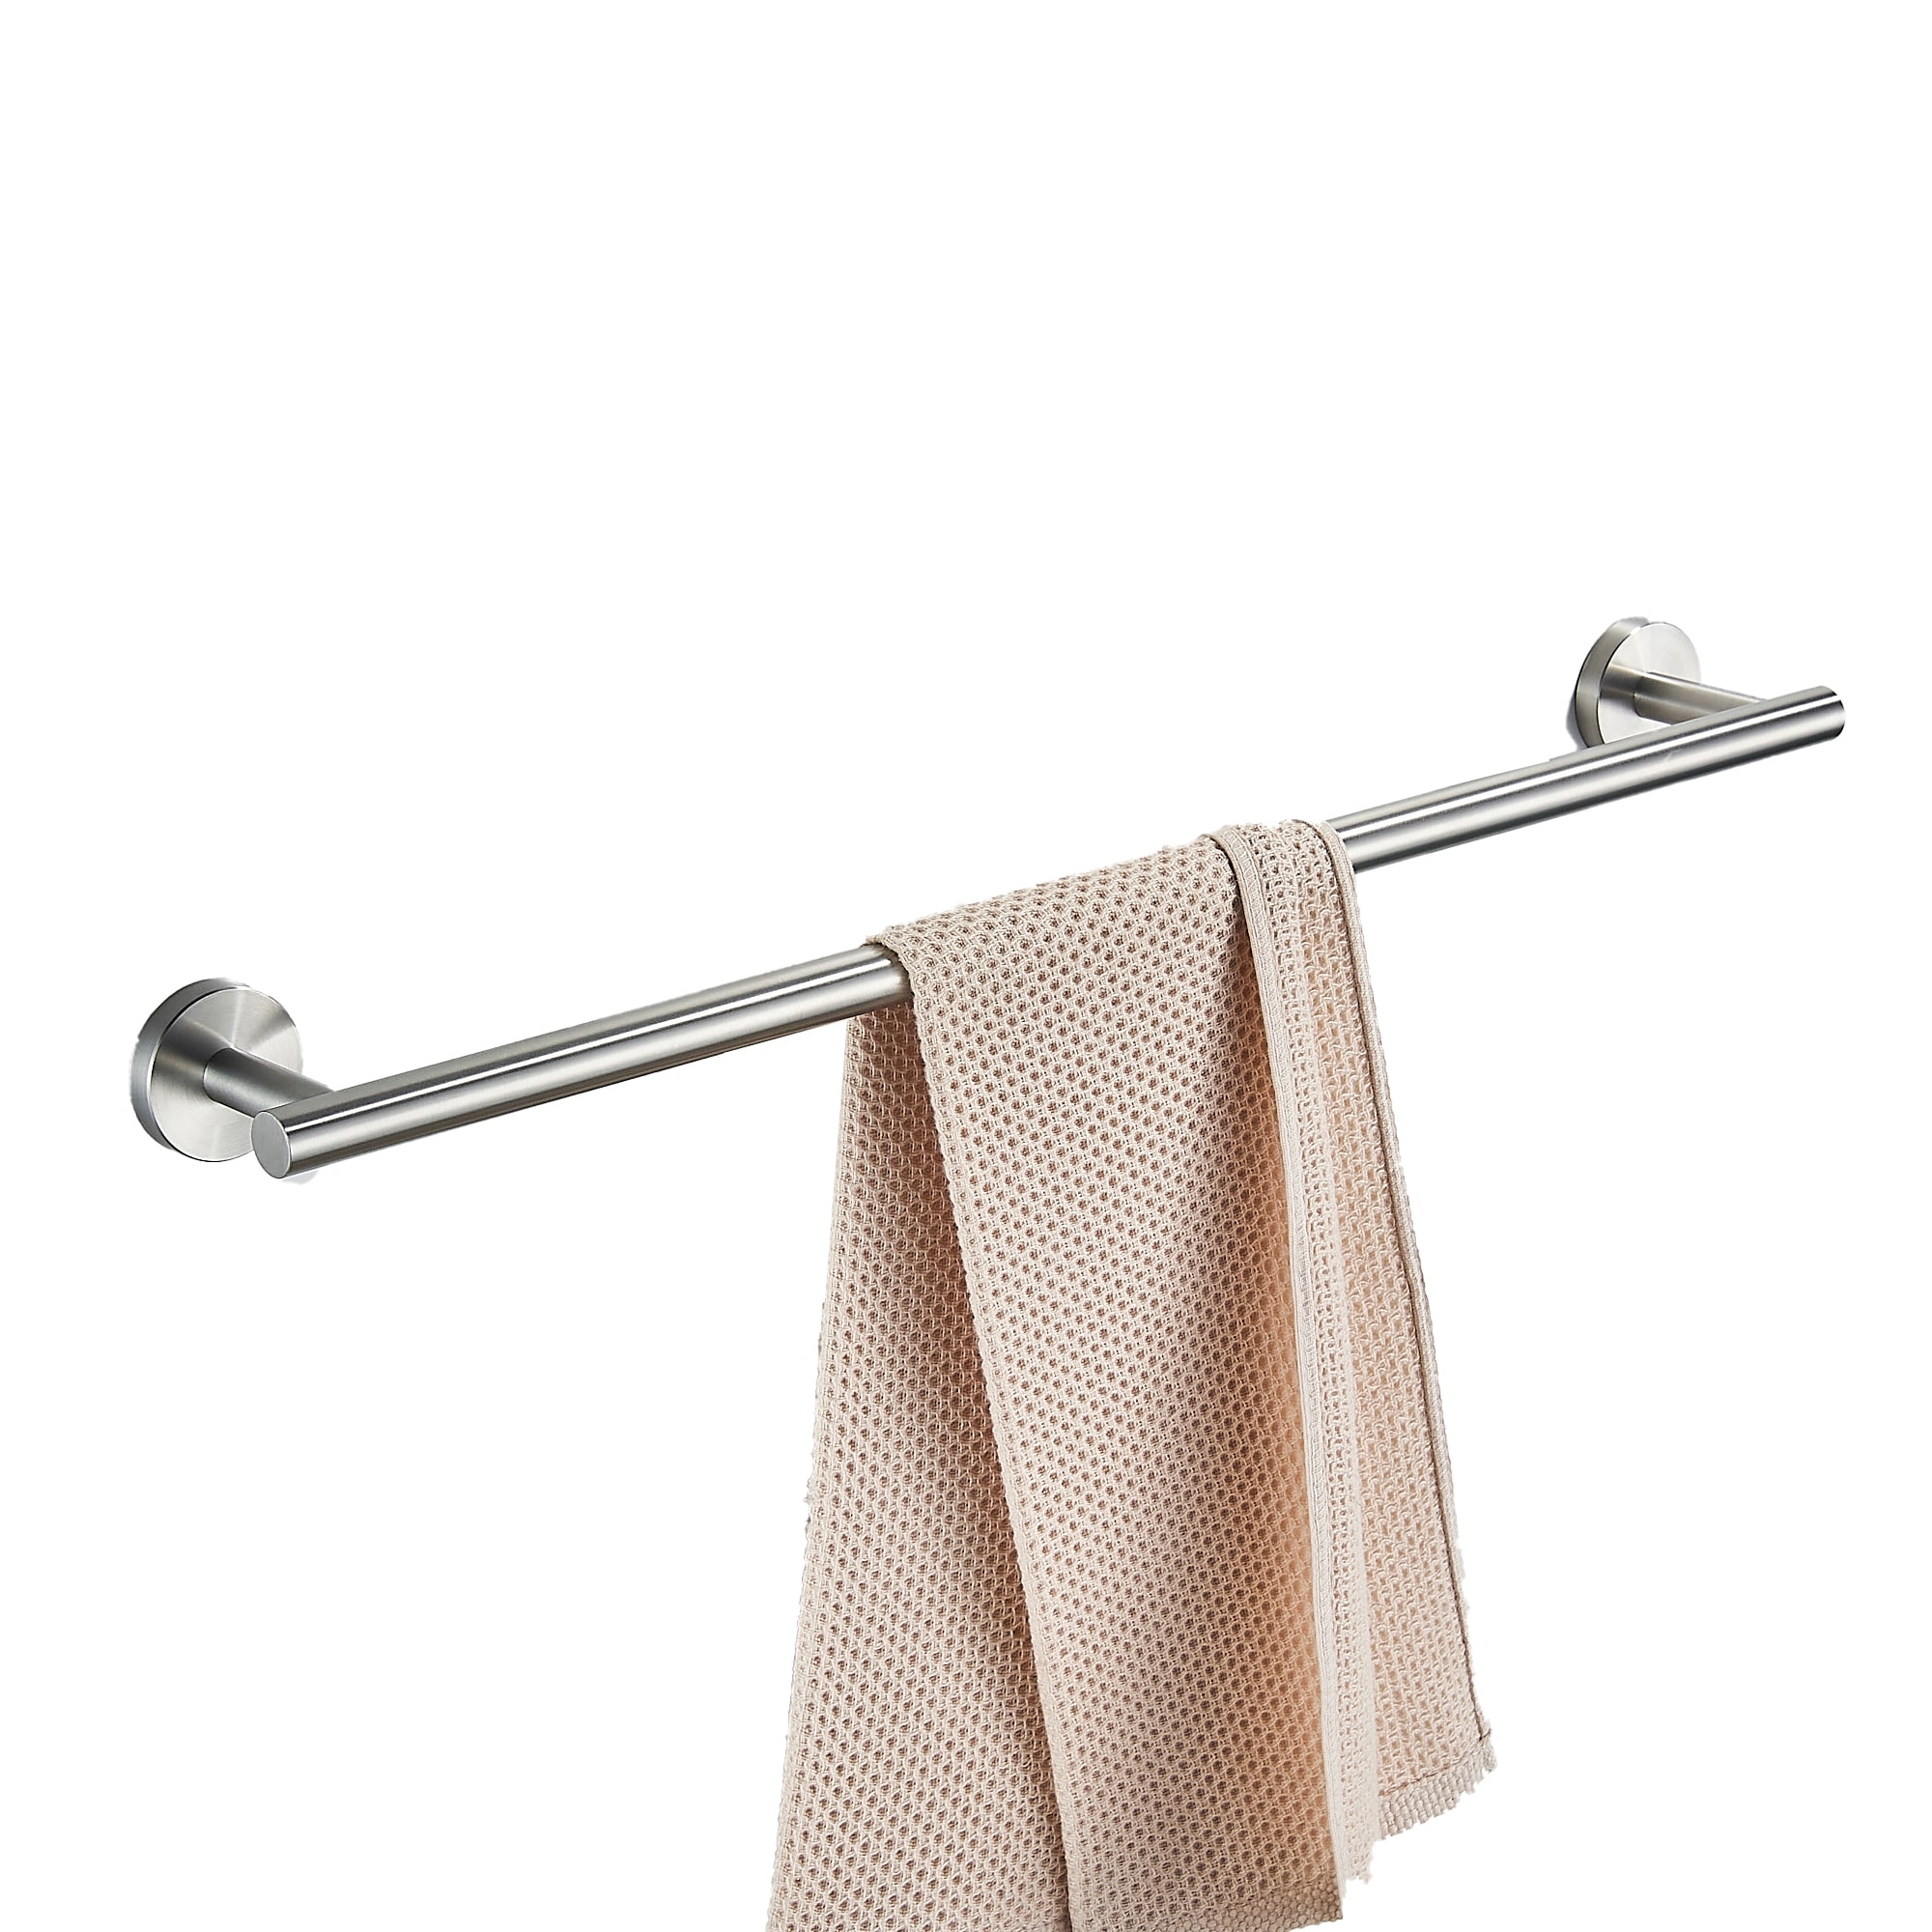 FORIOUS 24-in Brushed Nickel Wall Mount Single Towel Bar | LL0218BN